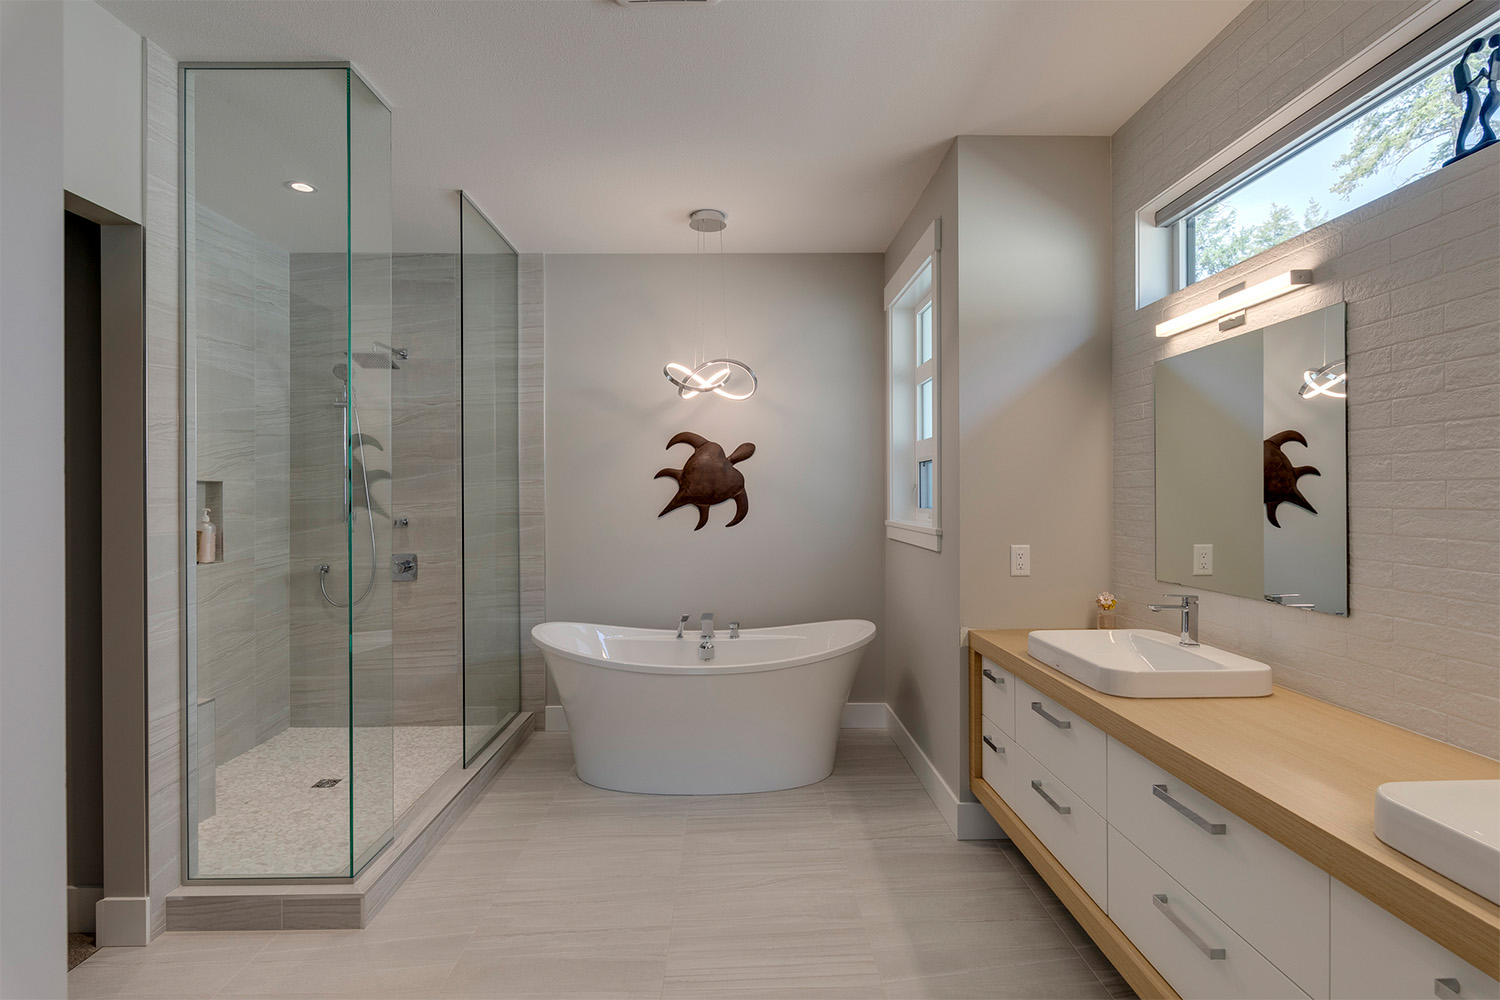 spacious shower panel with white/grey tile. bronze turtle decor